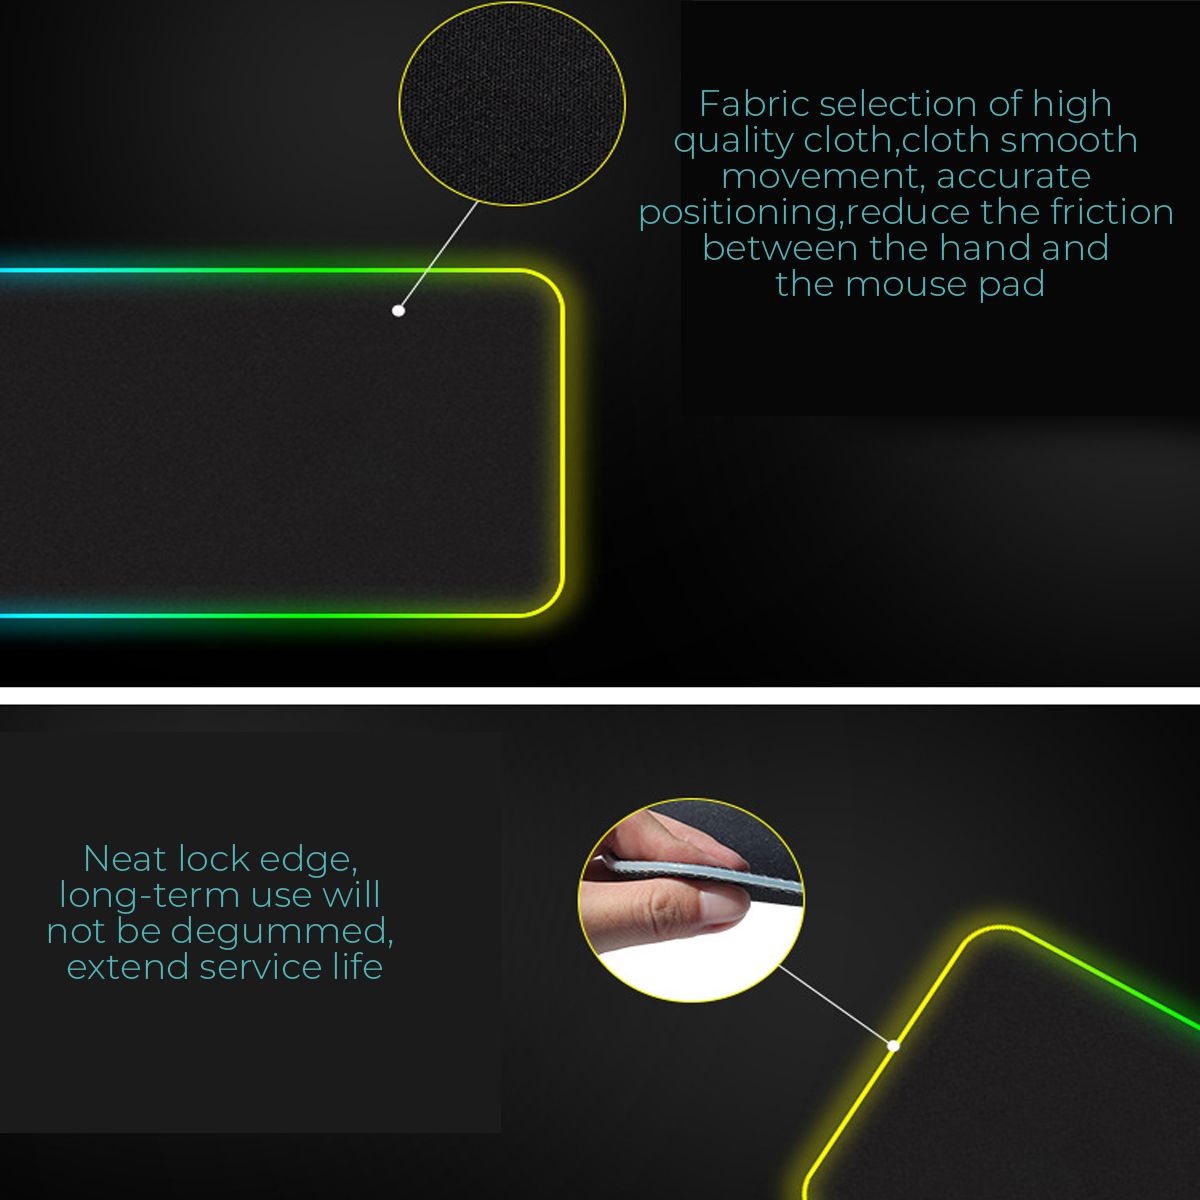 300x800x4mm-Wireless-Charging-0versized-Non-slip-Thickened-Mouse-Pad-RGB-Gaming-Keyboard-Pad-for-PC--1662854